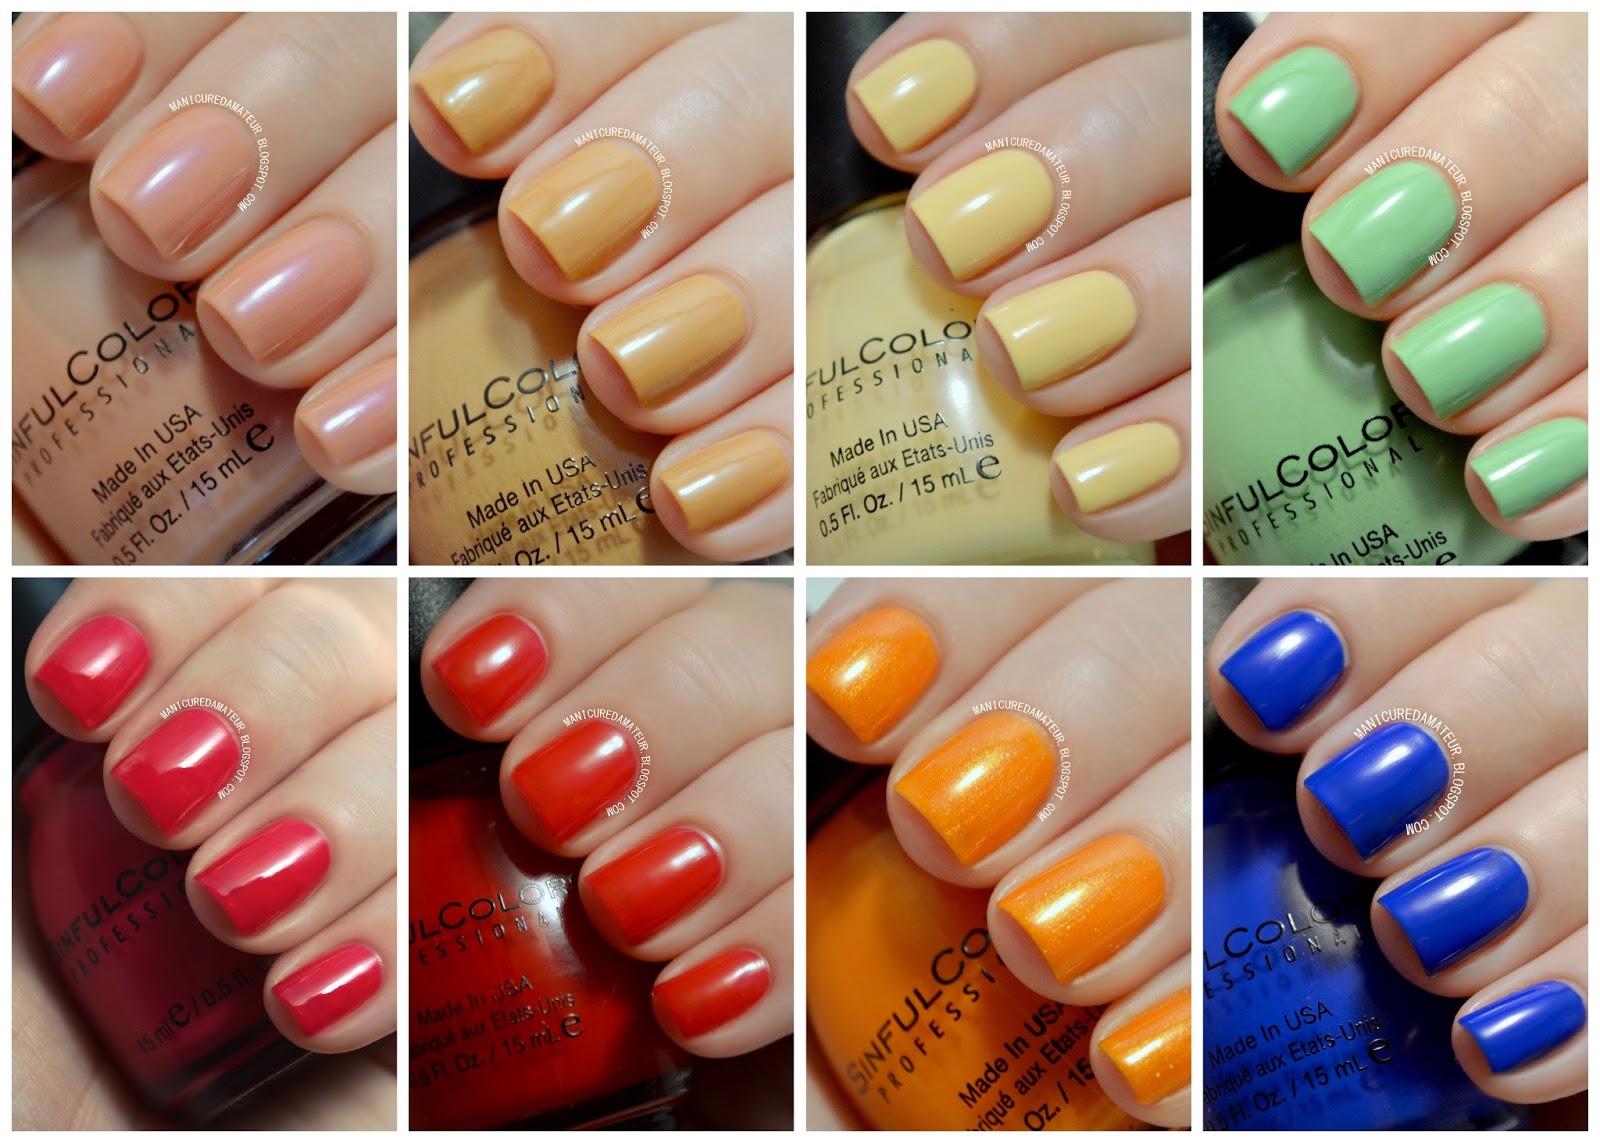 5. Sinful Colors Nail Polish Swatches - wide 8